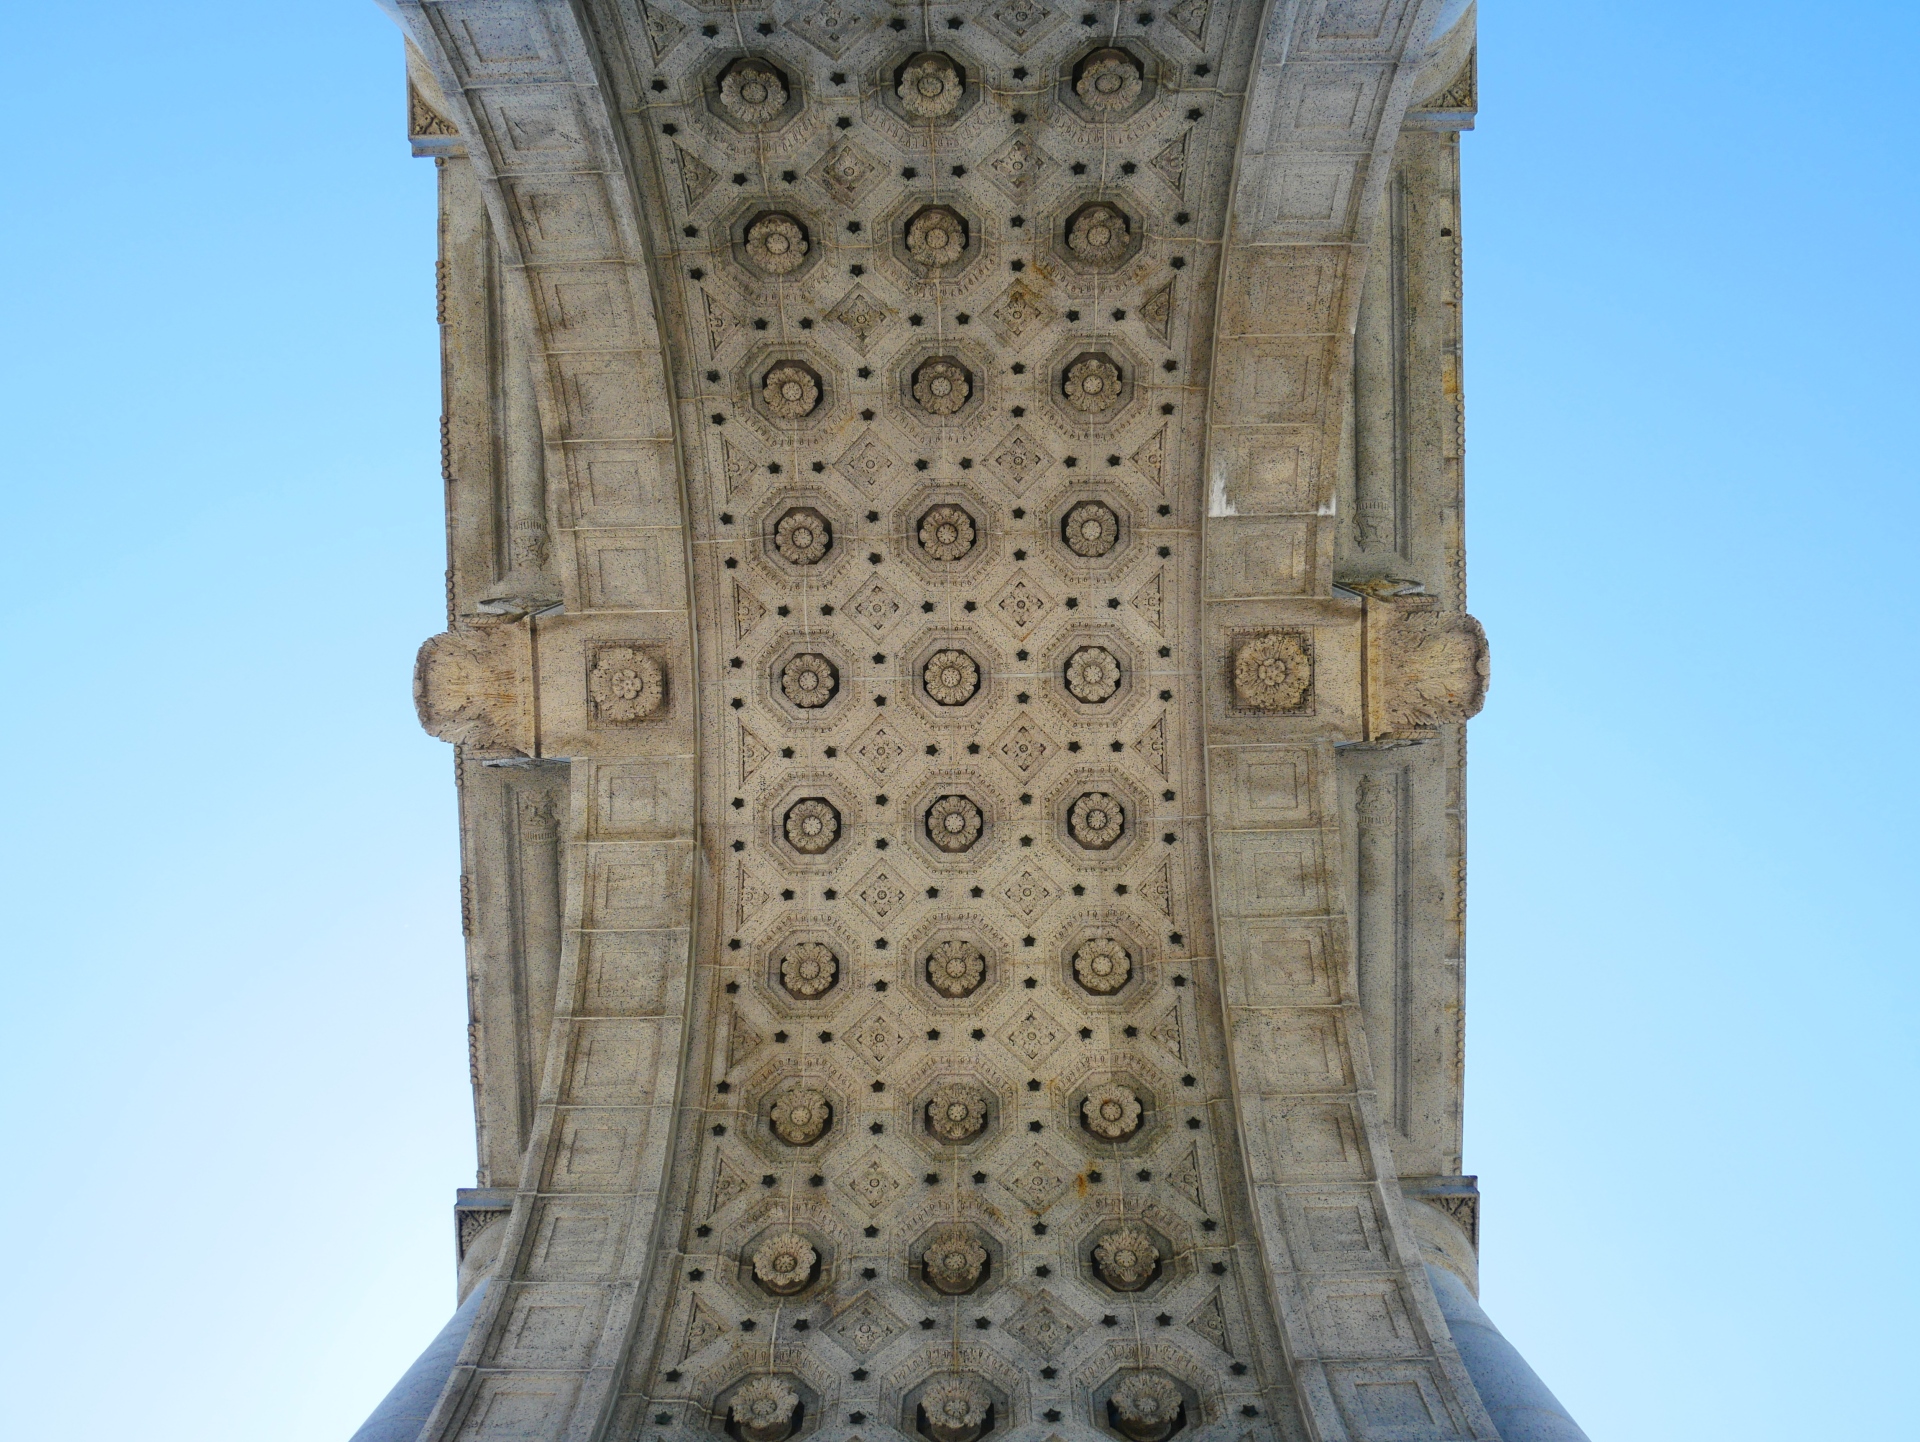 Looking up---but also like pretty darn straight---under the National Memorial Arch, July 2020